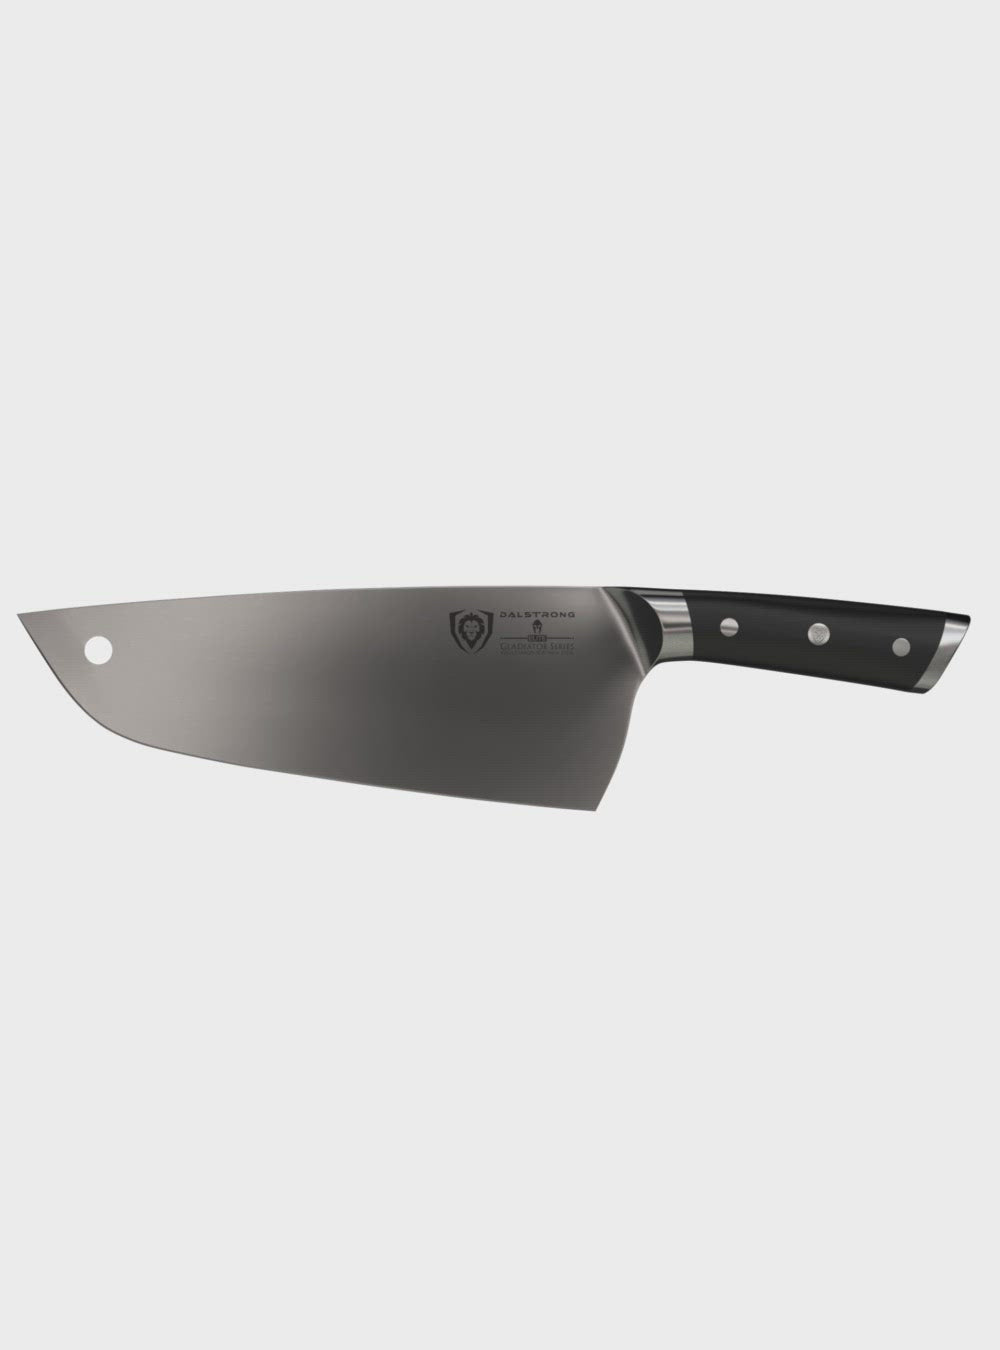  Dalstrong The Gladiator Series Elite Chef Knife 10